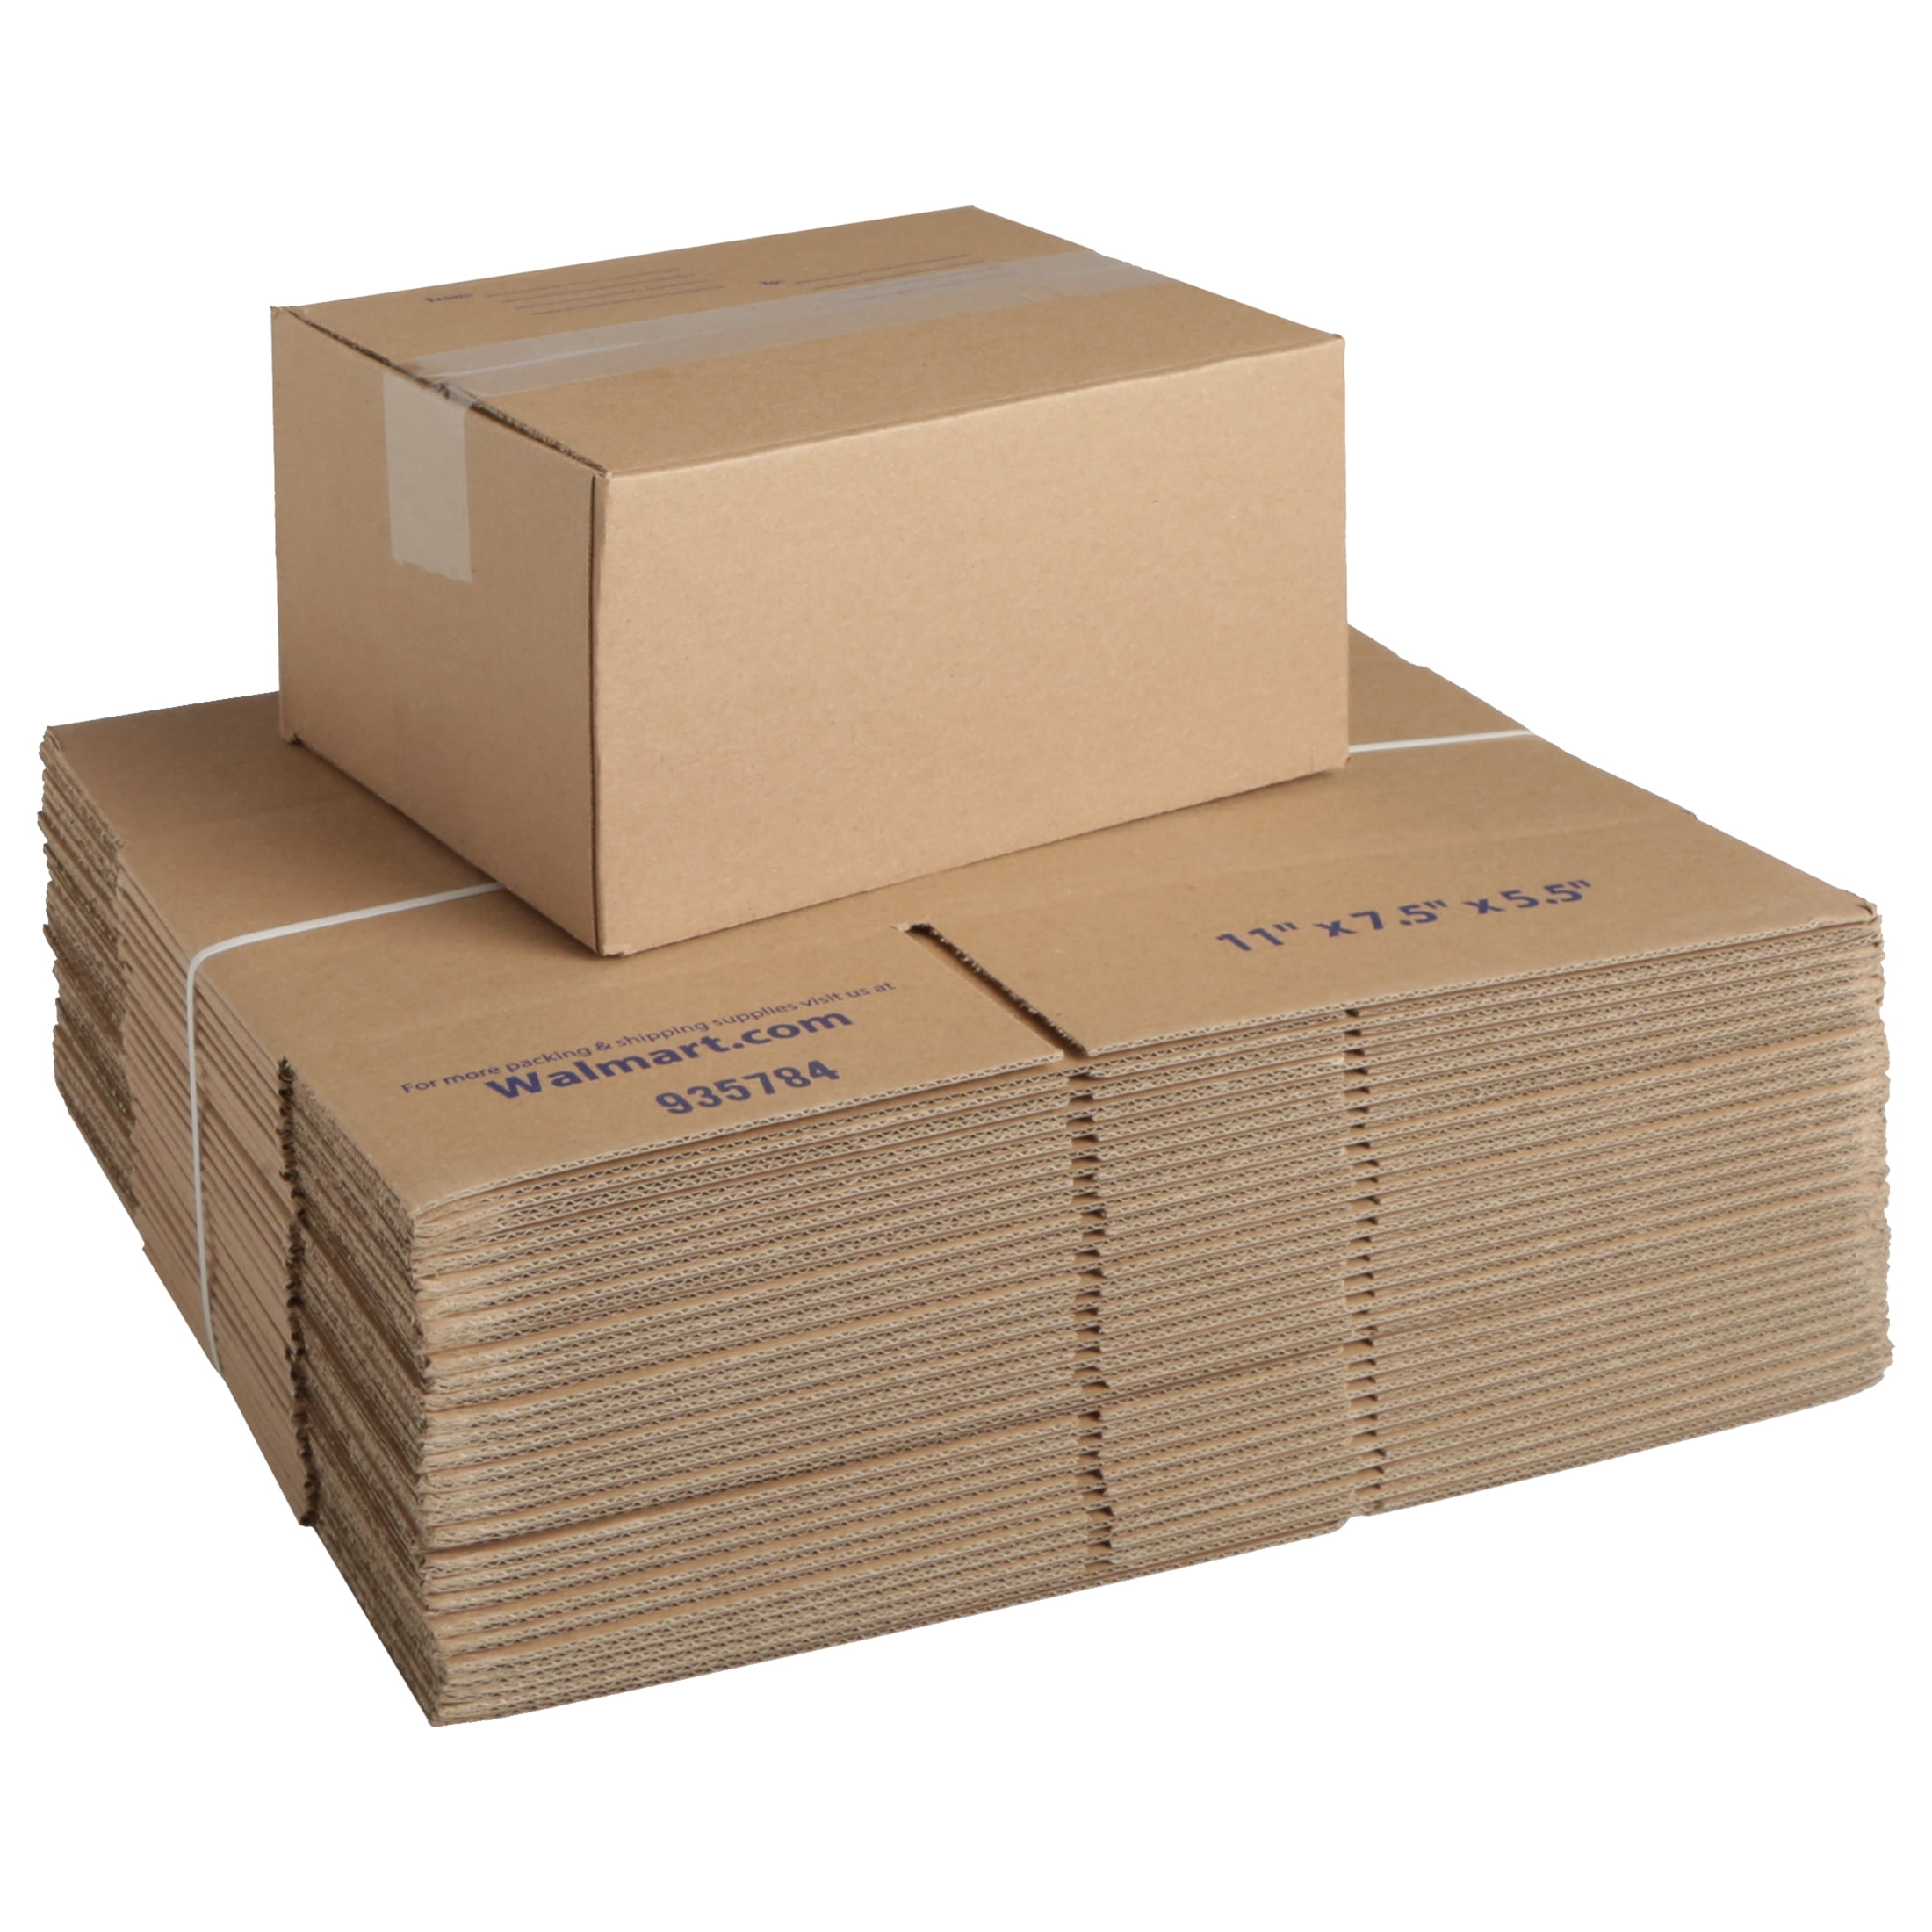 100 CARDBOARD BOXES 4"x4"x4" FREE QUICK DELIVERY  *WOW* 